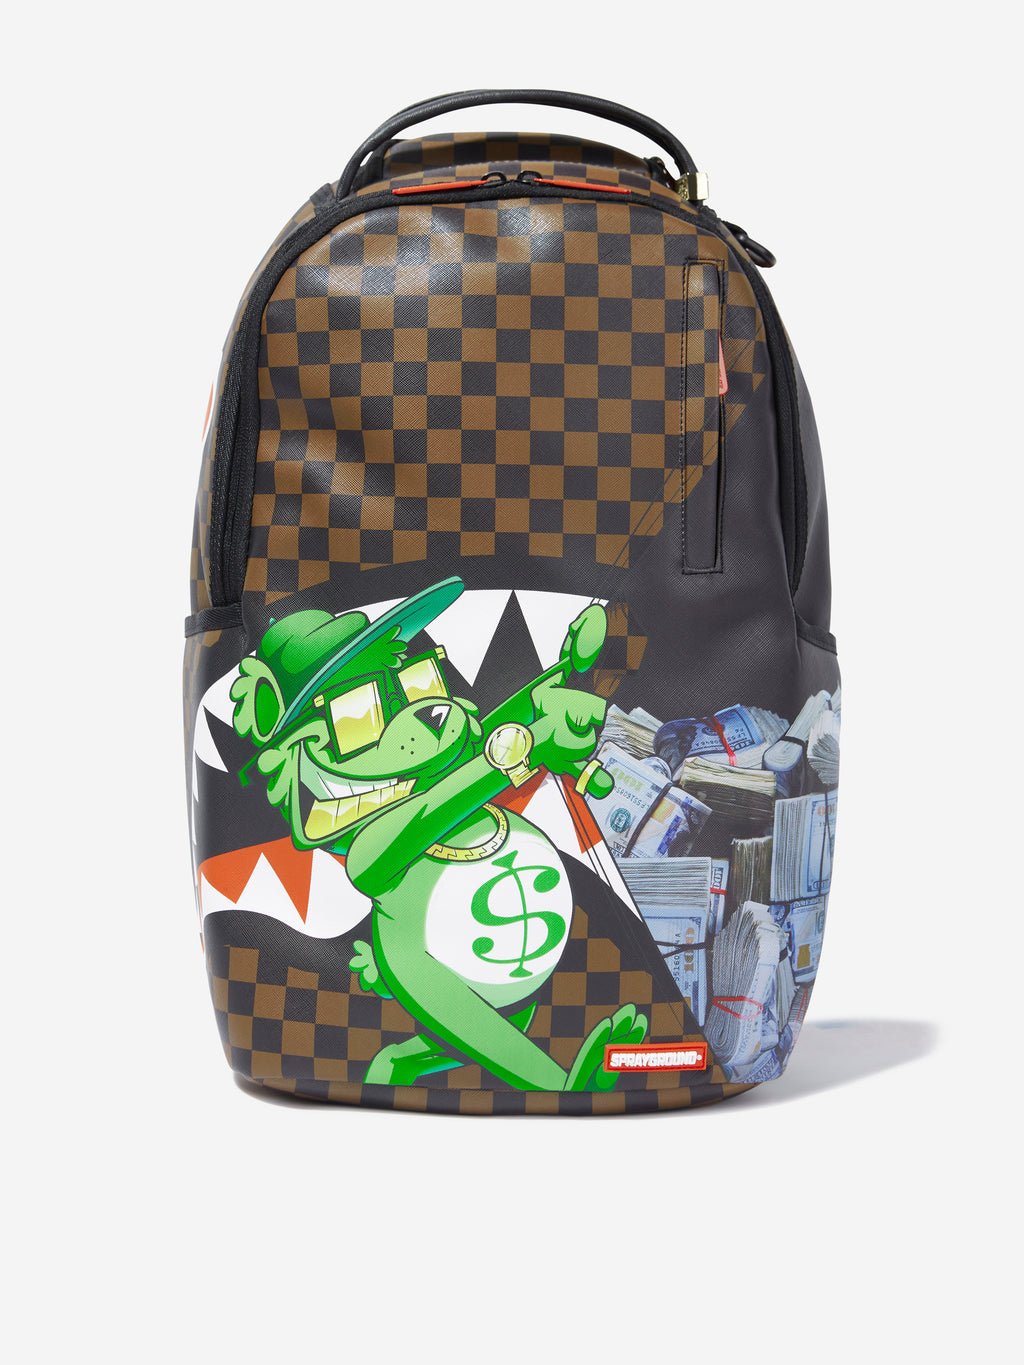 Money World Backpack in Brown